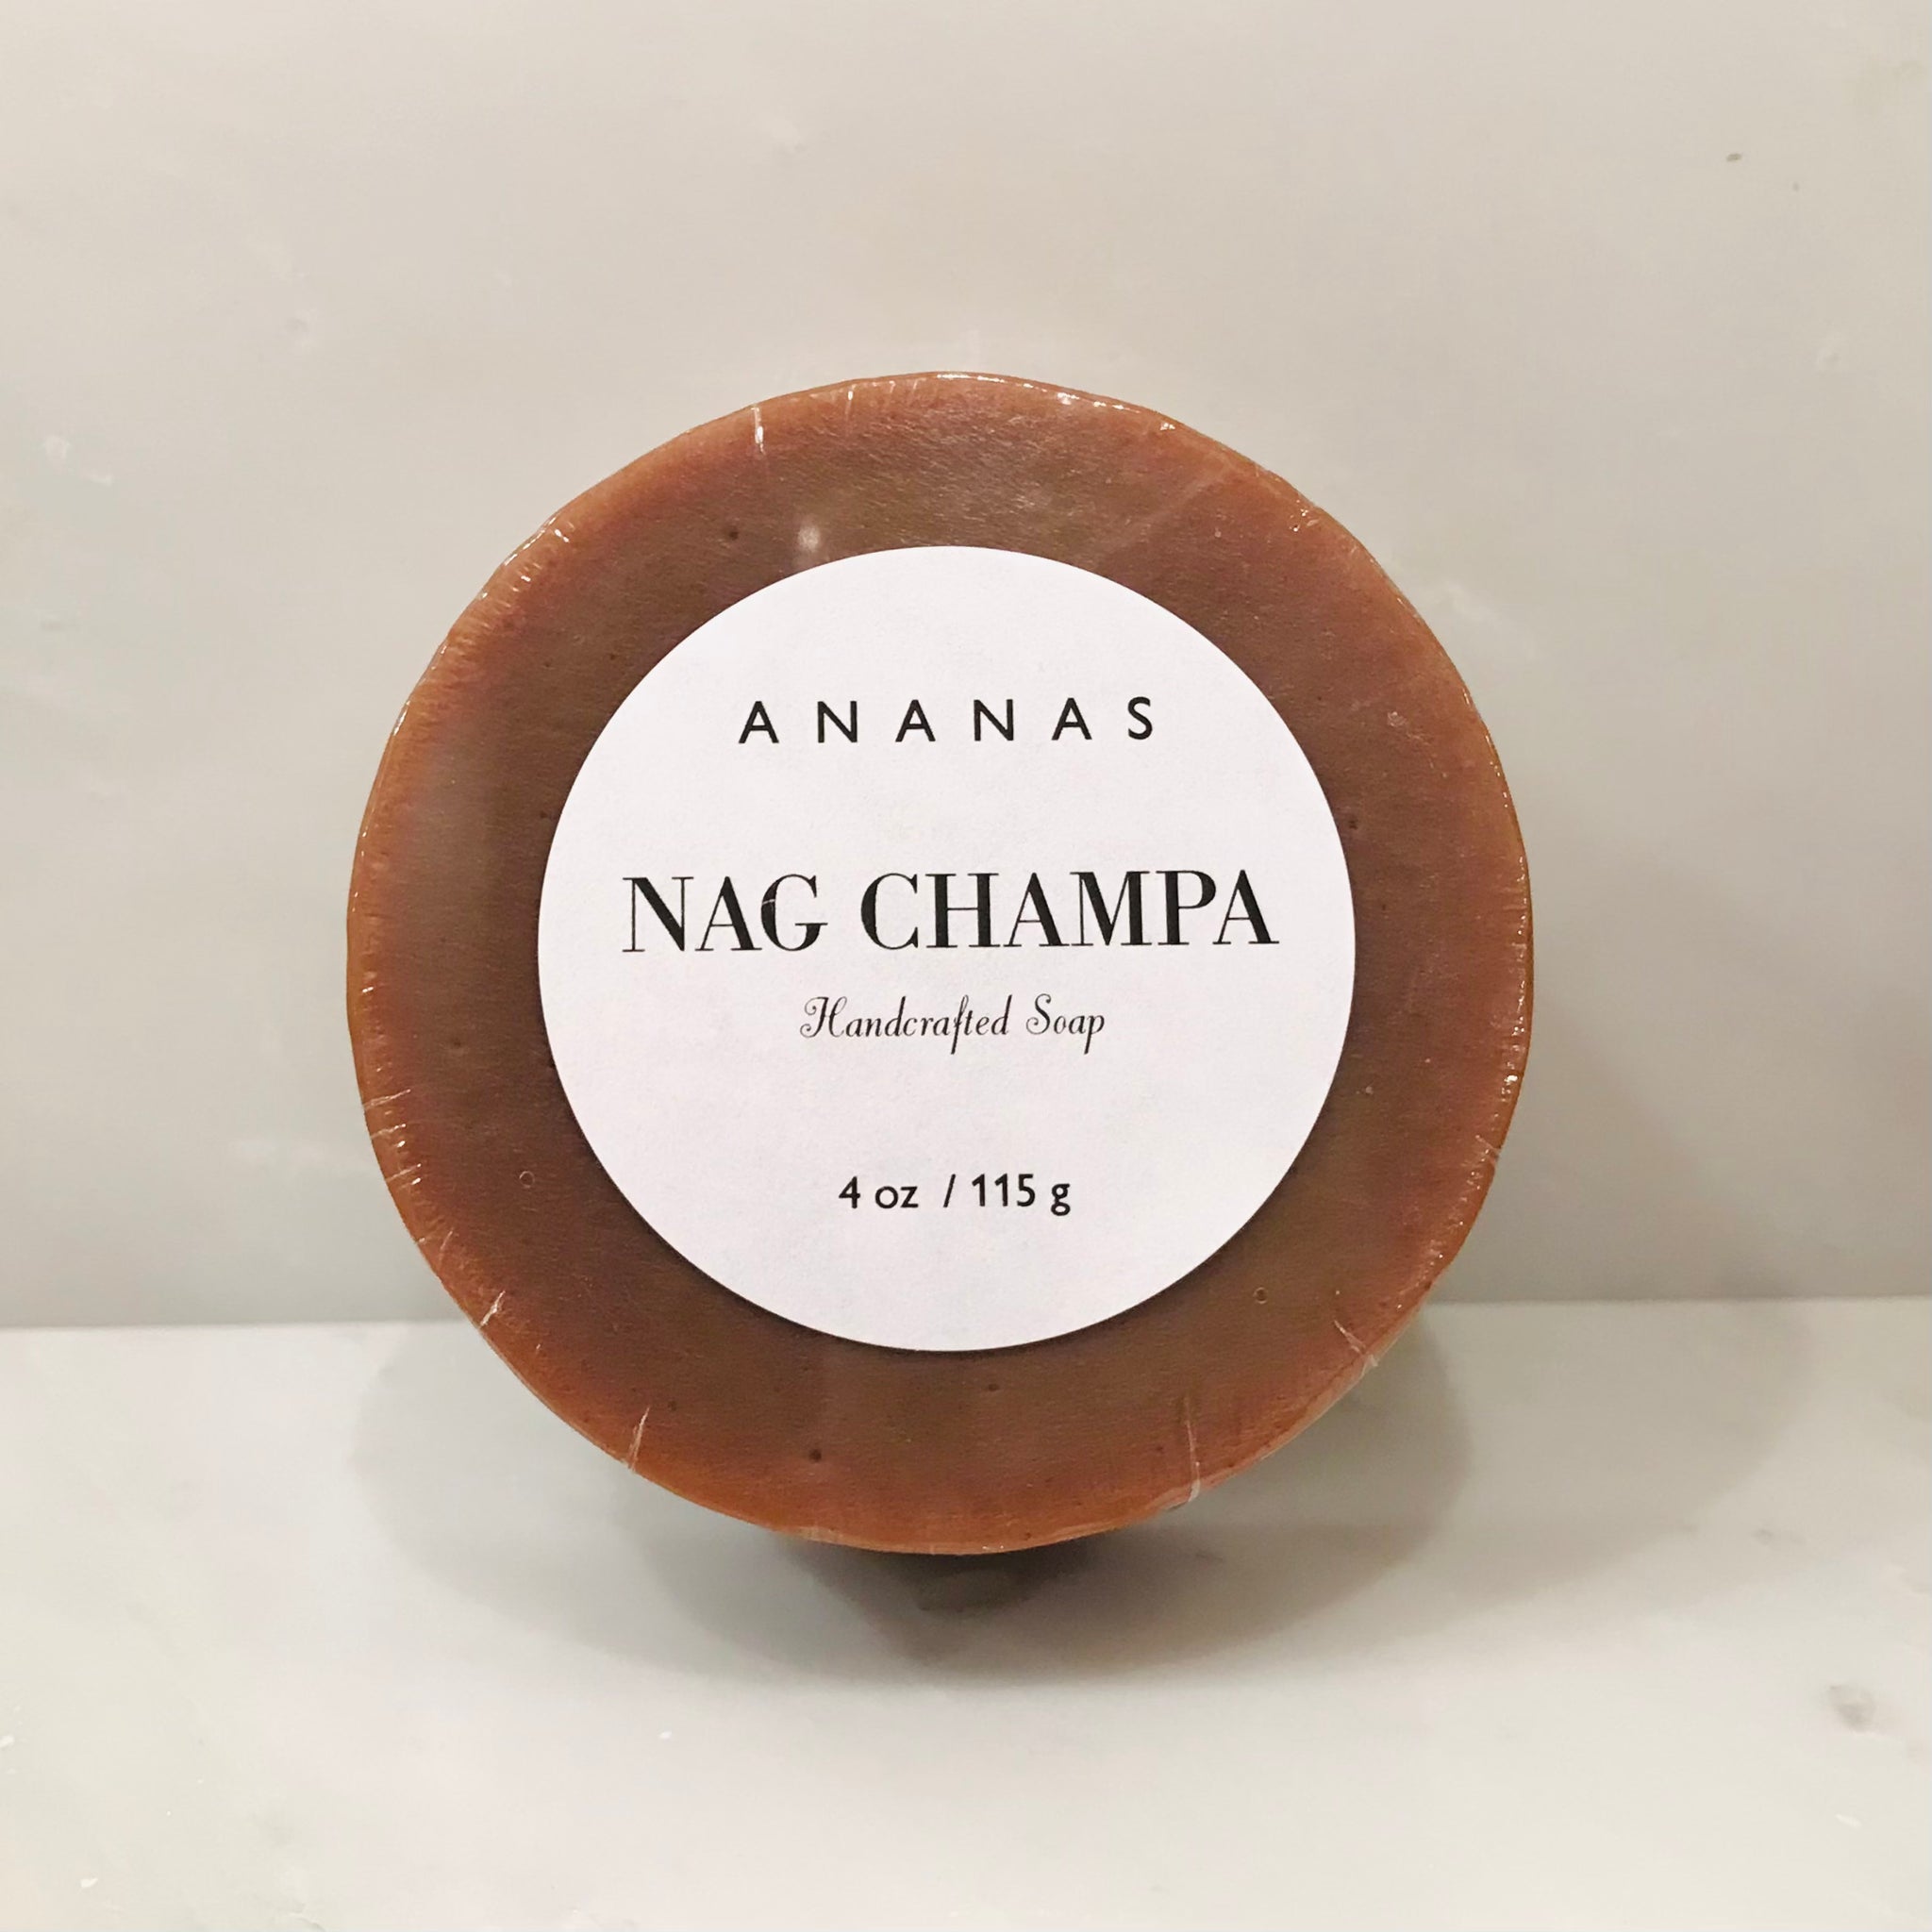 Nag Champa Handcrafted Soap